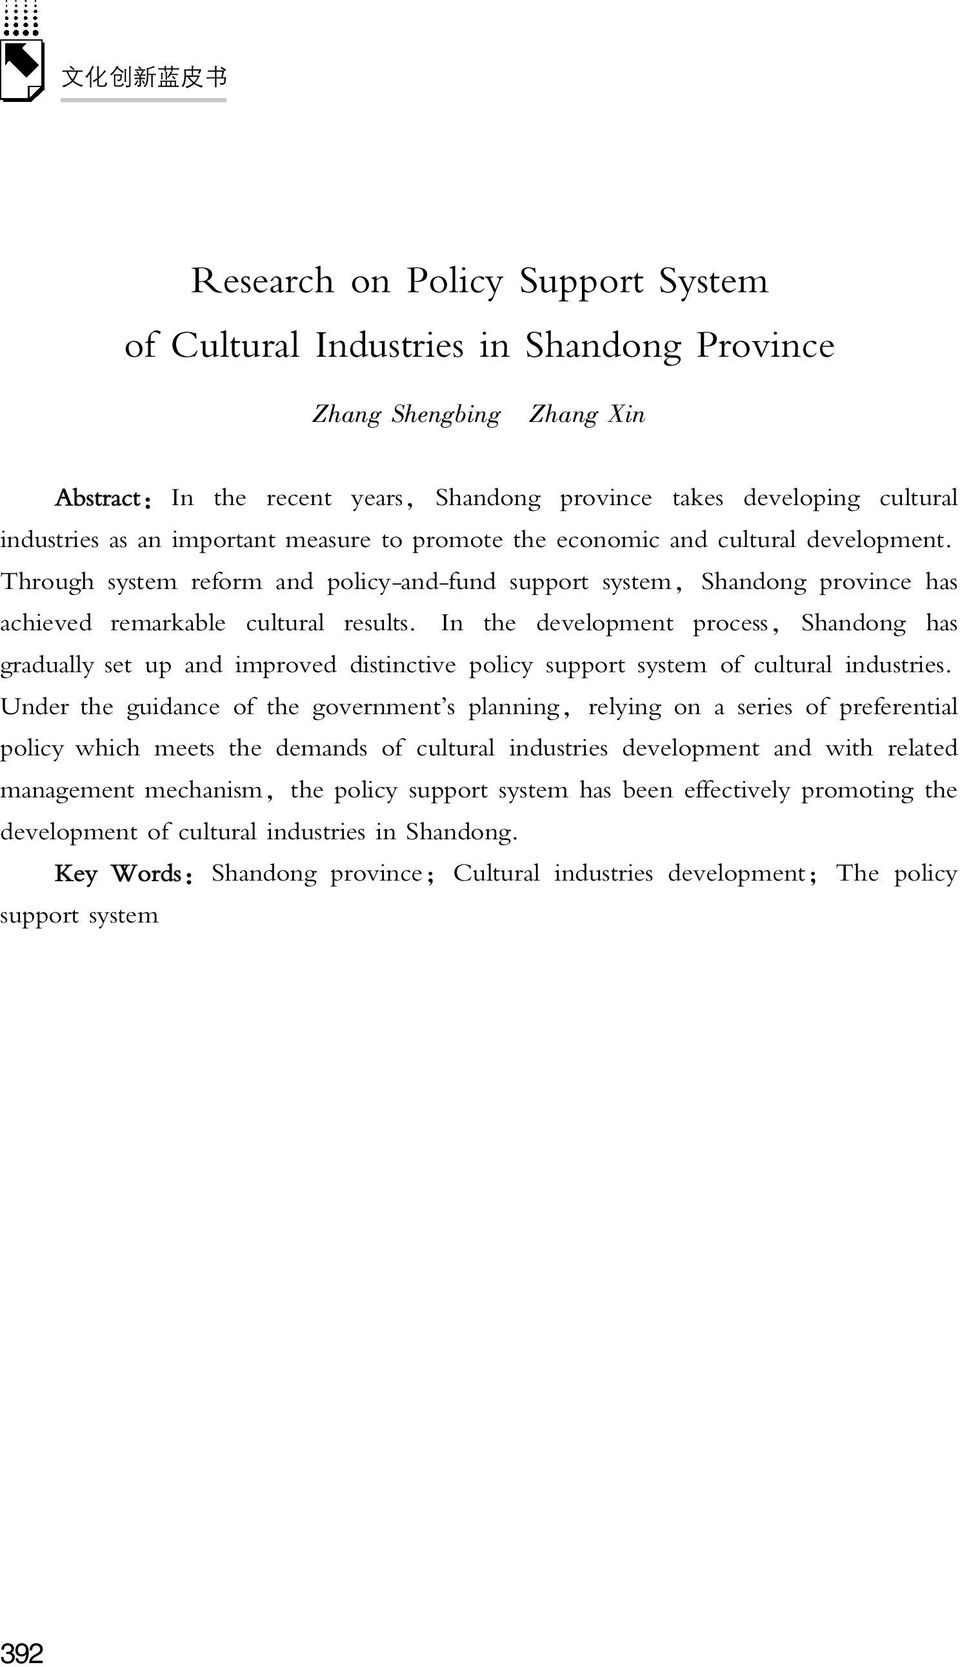 Through system reform and policy-and-fund support system, Shandong province has achieved remarkable cultural results.